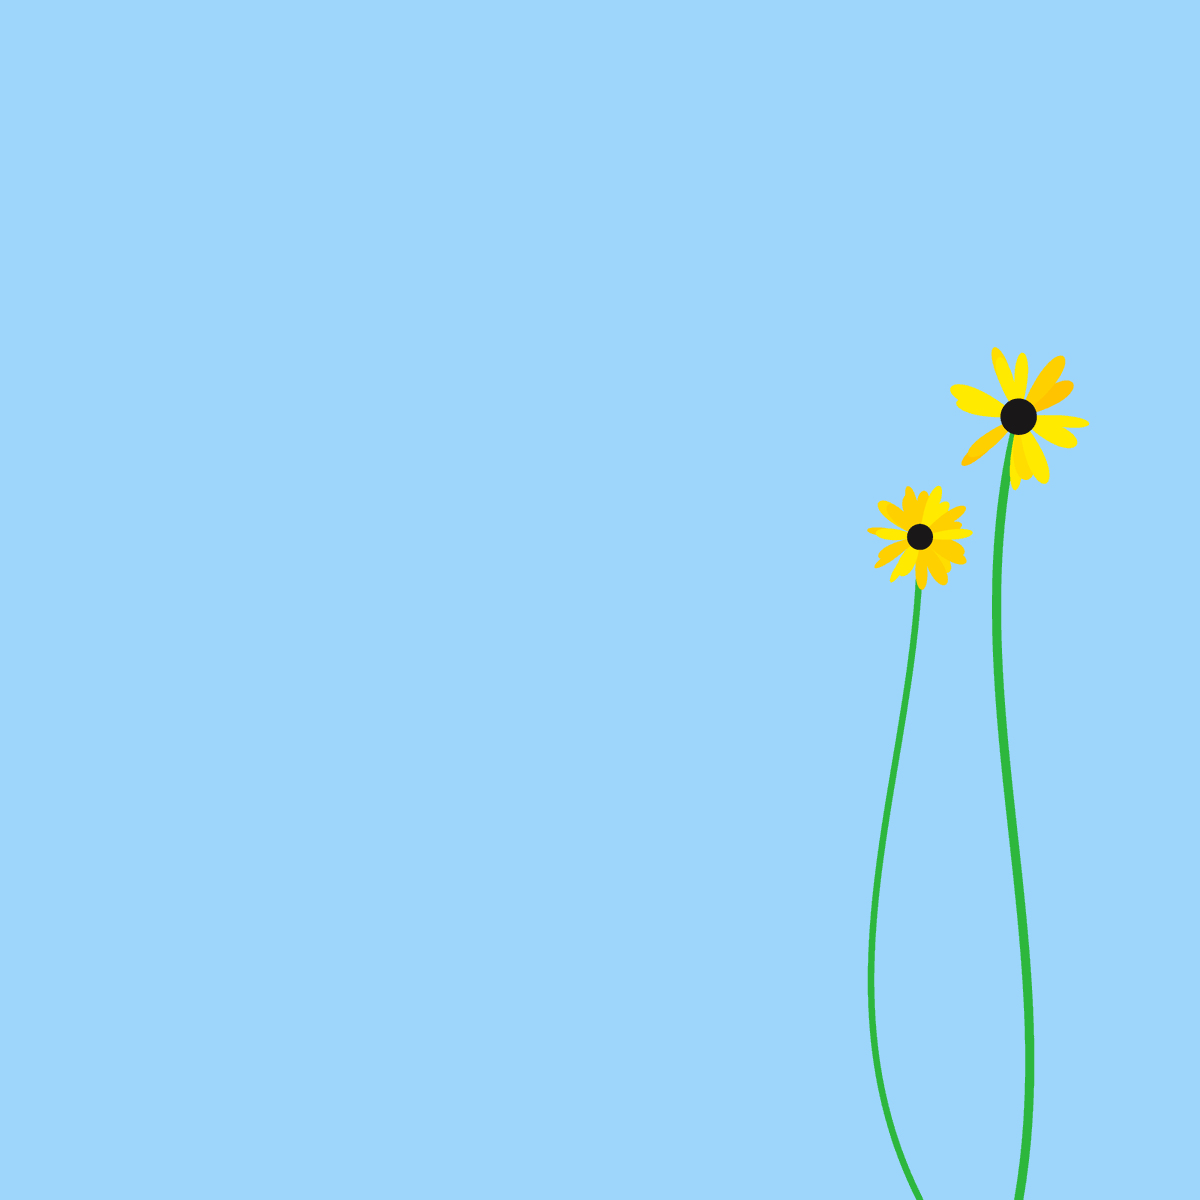 'A Bunch of Yellow Flowers' on @base via @Highlight_xyz. 50 randomly generated images of yellow flowers. Token #1 contains 1 flower, Token #2 contains 2 flowers, etc. Mint for free and receive a random token in the series. First come first serve. highlight.xyz/mint/663d8d9cd…